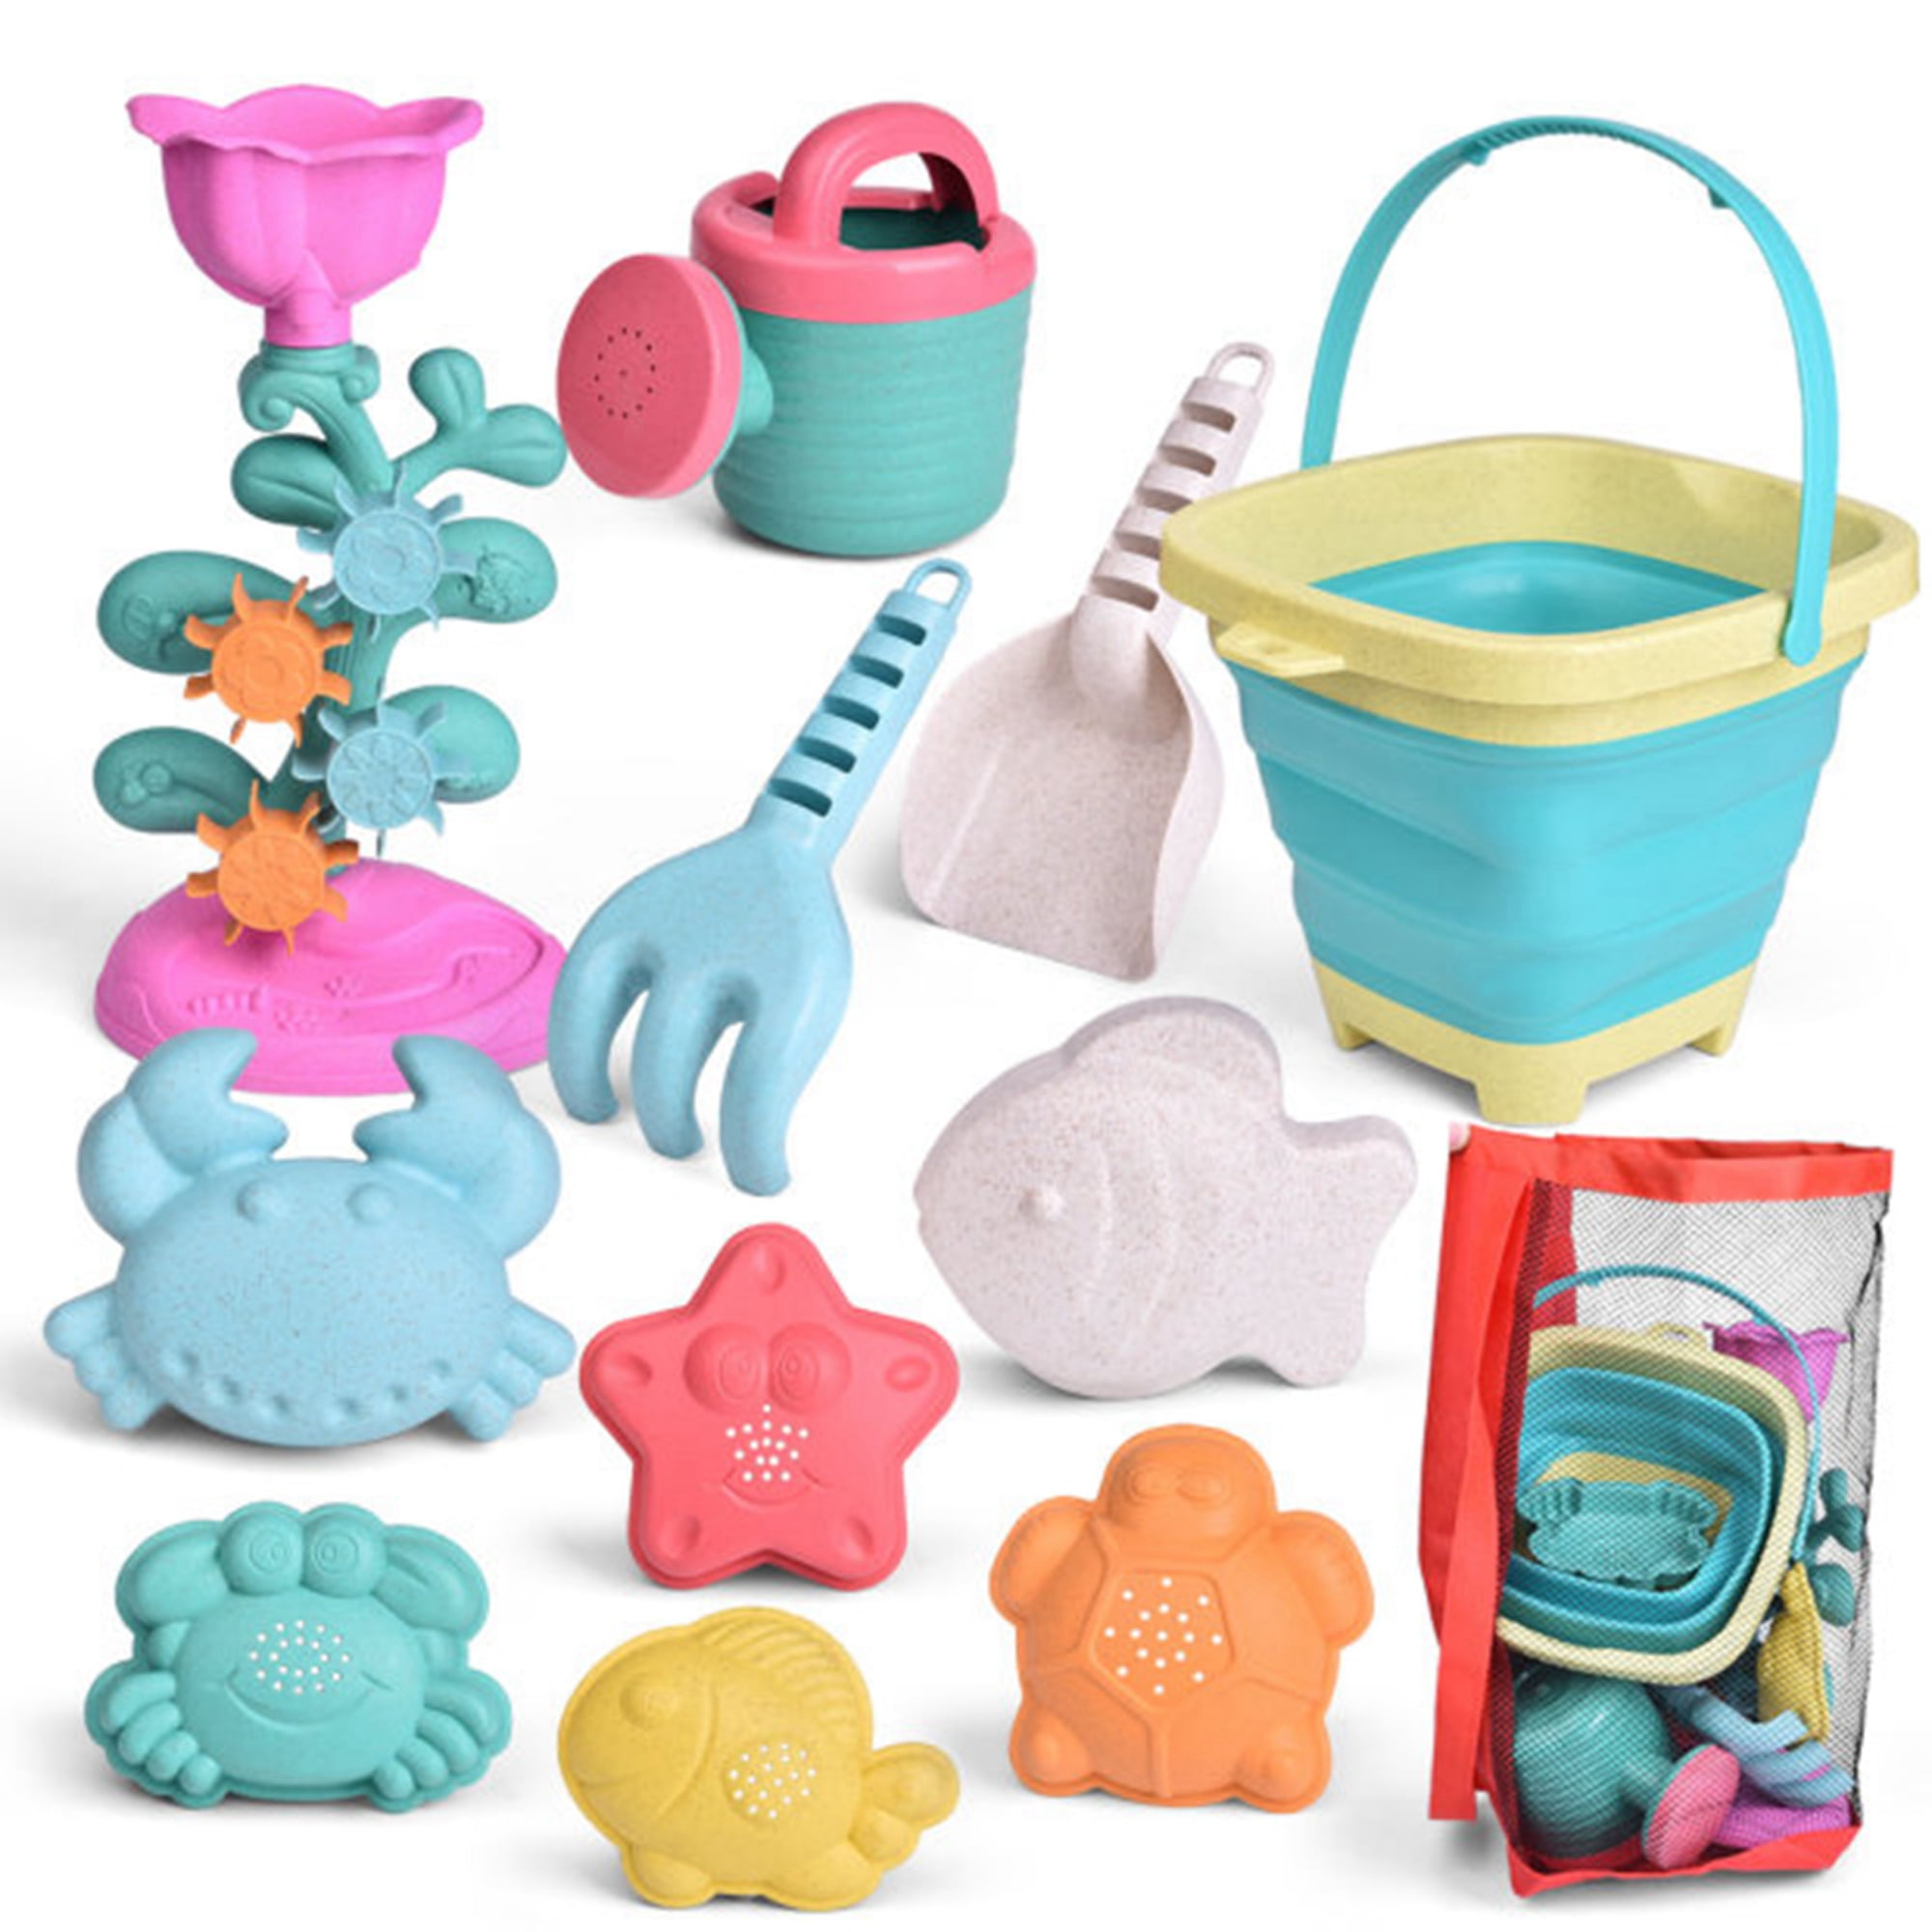 Boys Girls Sand&Water Table Sandbox Sand Toys Creative Sand Tools Kit Sand Molds Beach Bucket as shown Baby Play Water Sand Tools for Children Birthday Gift Parent-child Toys Clearance Sale Kids Beach Toy Set